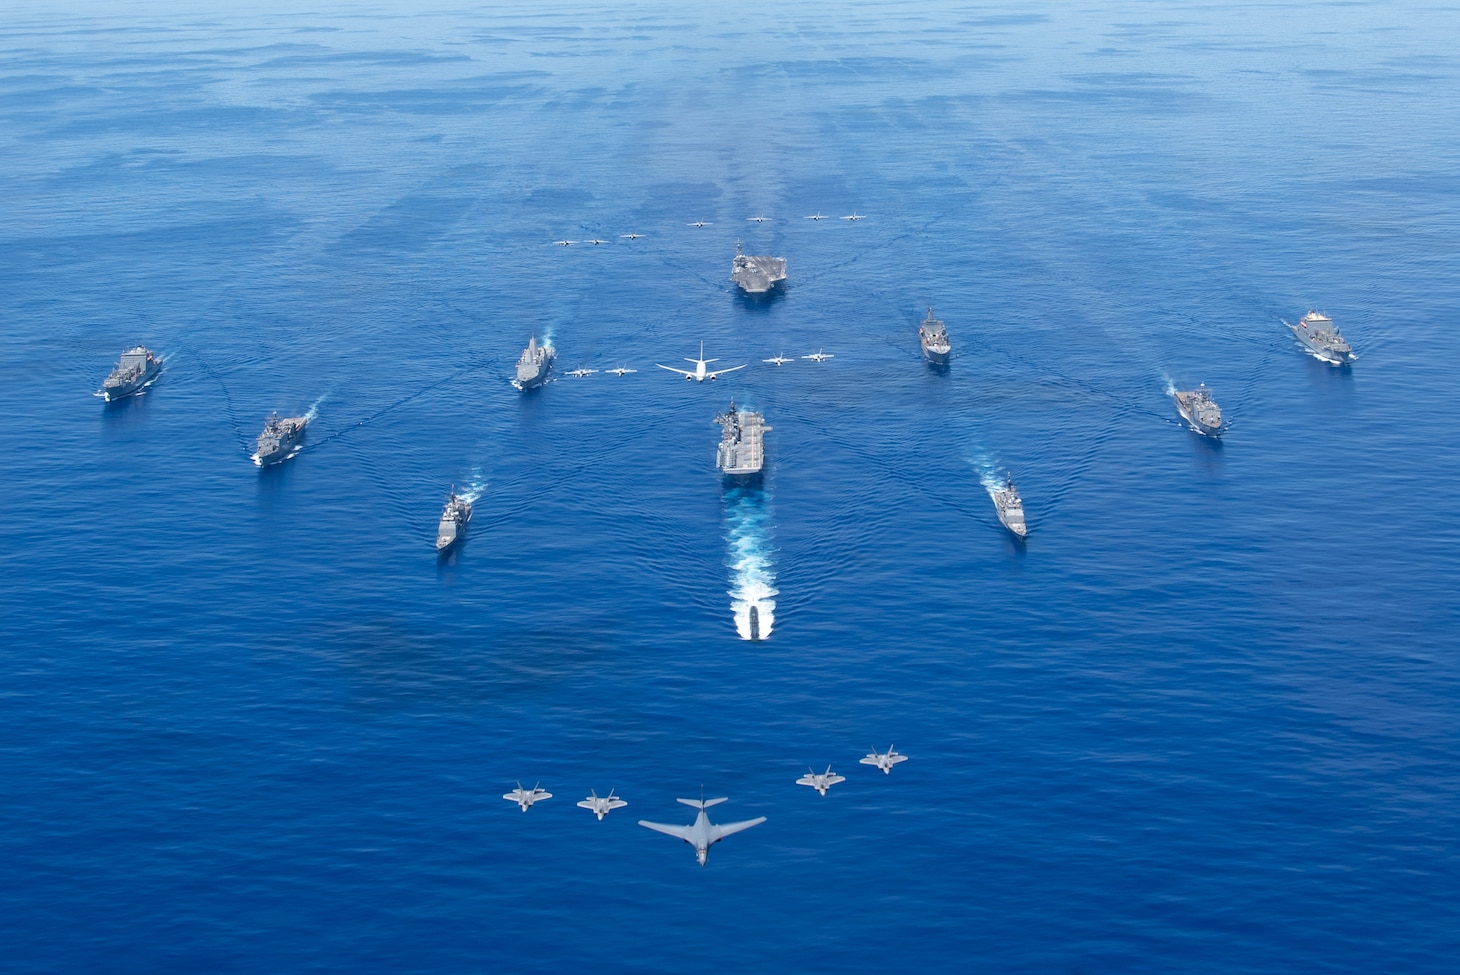 PHILIPPINE SEA (Sept. 25, 2020) From left, USNS Charles Drew (T-AKE 10), USS Comstock (LSD 45), USS Shiloh (CG 67), USS New Orleans (LPD 18), USS Chicago (SSN 721), USS America (LHA 6), USS Ronald Reagan (CVN 76), USNS John Ericsson (T-AO 194), USS Antietam (CG 54), USS Germantown (LSD 42), and USNS Sacagawea (T-AKE 2) steam in formation while E/A-18G Growlers and FA-18E Super Hornets from Carrier Air Wing (CVW) 5, a P-8 Poseidon from Commander Task Force 72,  and U.S. Air Force F-22 Raptors and  a B-1B Bomber fly over the formation in support of Valiant Shield 2020. Valiant Shield is a U.S. only, biennial field training exercise (FTX) with a focus on integration of joint training in a blue-water environment among U.S. forces. This training enables real-world proficiency in sustaining joint forces through detecting, locating, tracking and engaging units at sea, in the air, on land and in cyberspace in response to a range of mission areas. (U.S. Navy photo by Mass Communication Specialist 3rd Class Jason Tarleton)